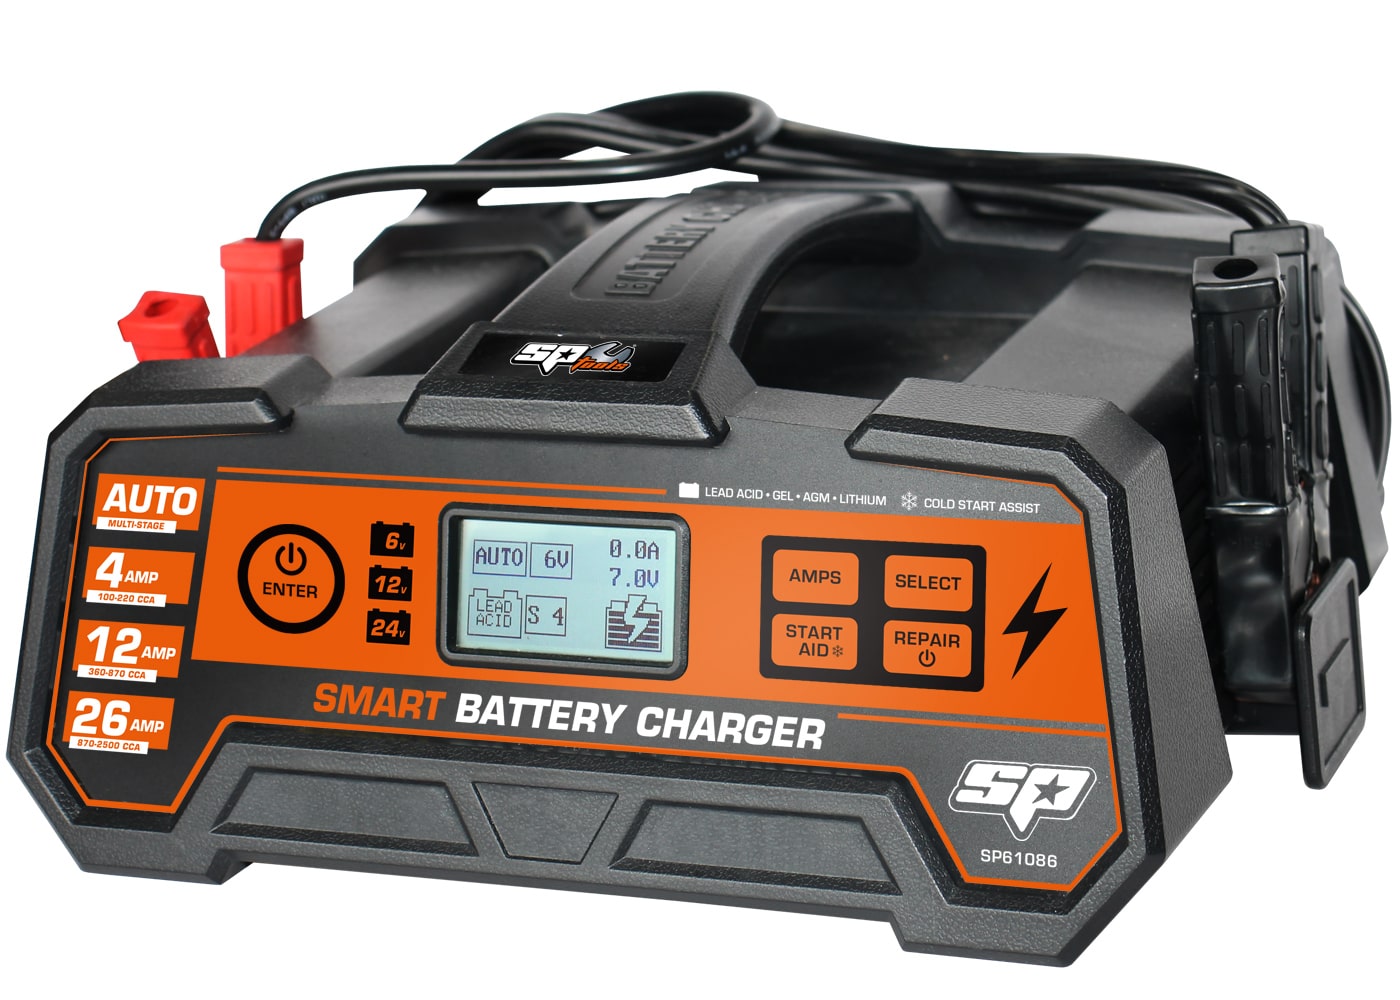 Smart Battery Charger 8 Stage Multi Volt 6, 12 & 24V 26A - SP61086 by SP Tools